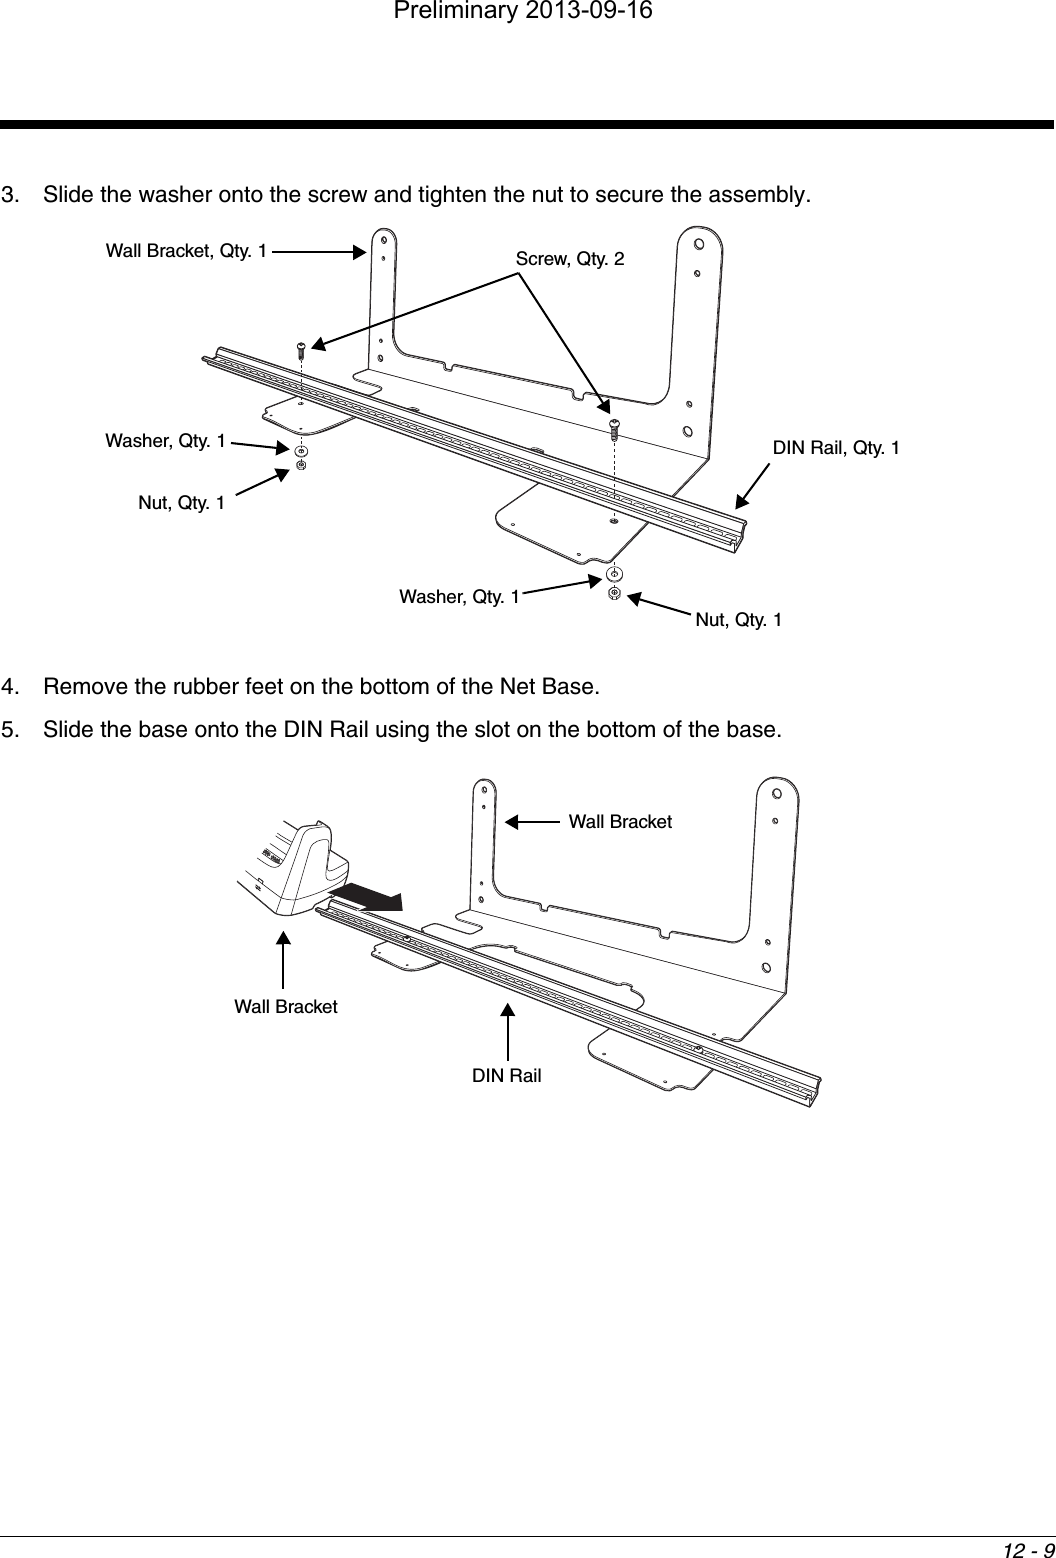 12 - 93. Slide the washer onto the screw and tighten the nut to secure the assembly.4. Remove the rubber feet on the bottom of the Net Base.5. Slide the base onto the DIN Rail using the slot on the bottom of the base. Wall Bracket, Qty. 1DIN Rail, Qty. 1Washer, Qty. 1Nut, Qty. 1Screw, Qty. 2Washer, Qty. 1Nut, Qty. 1Wall BracketWall BracketDIN RailPreliminary 2013-09-16